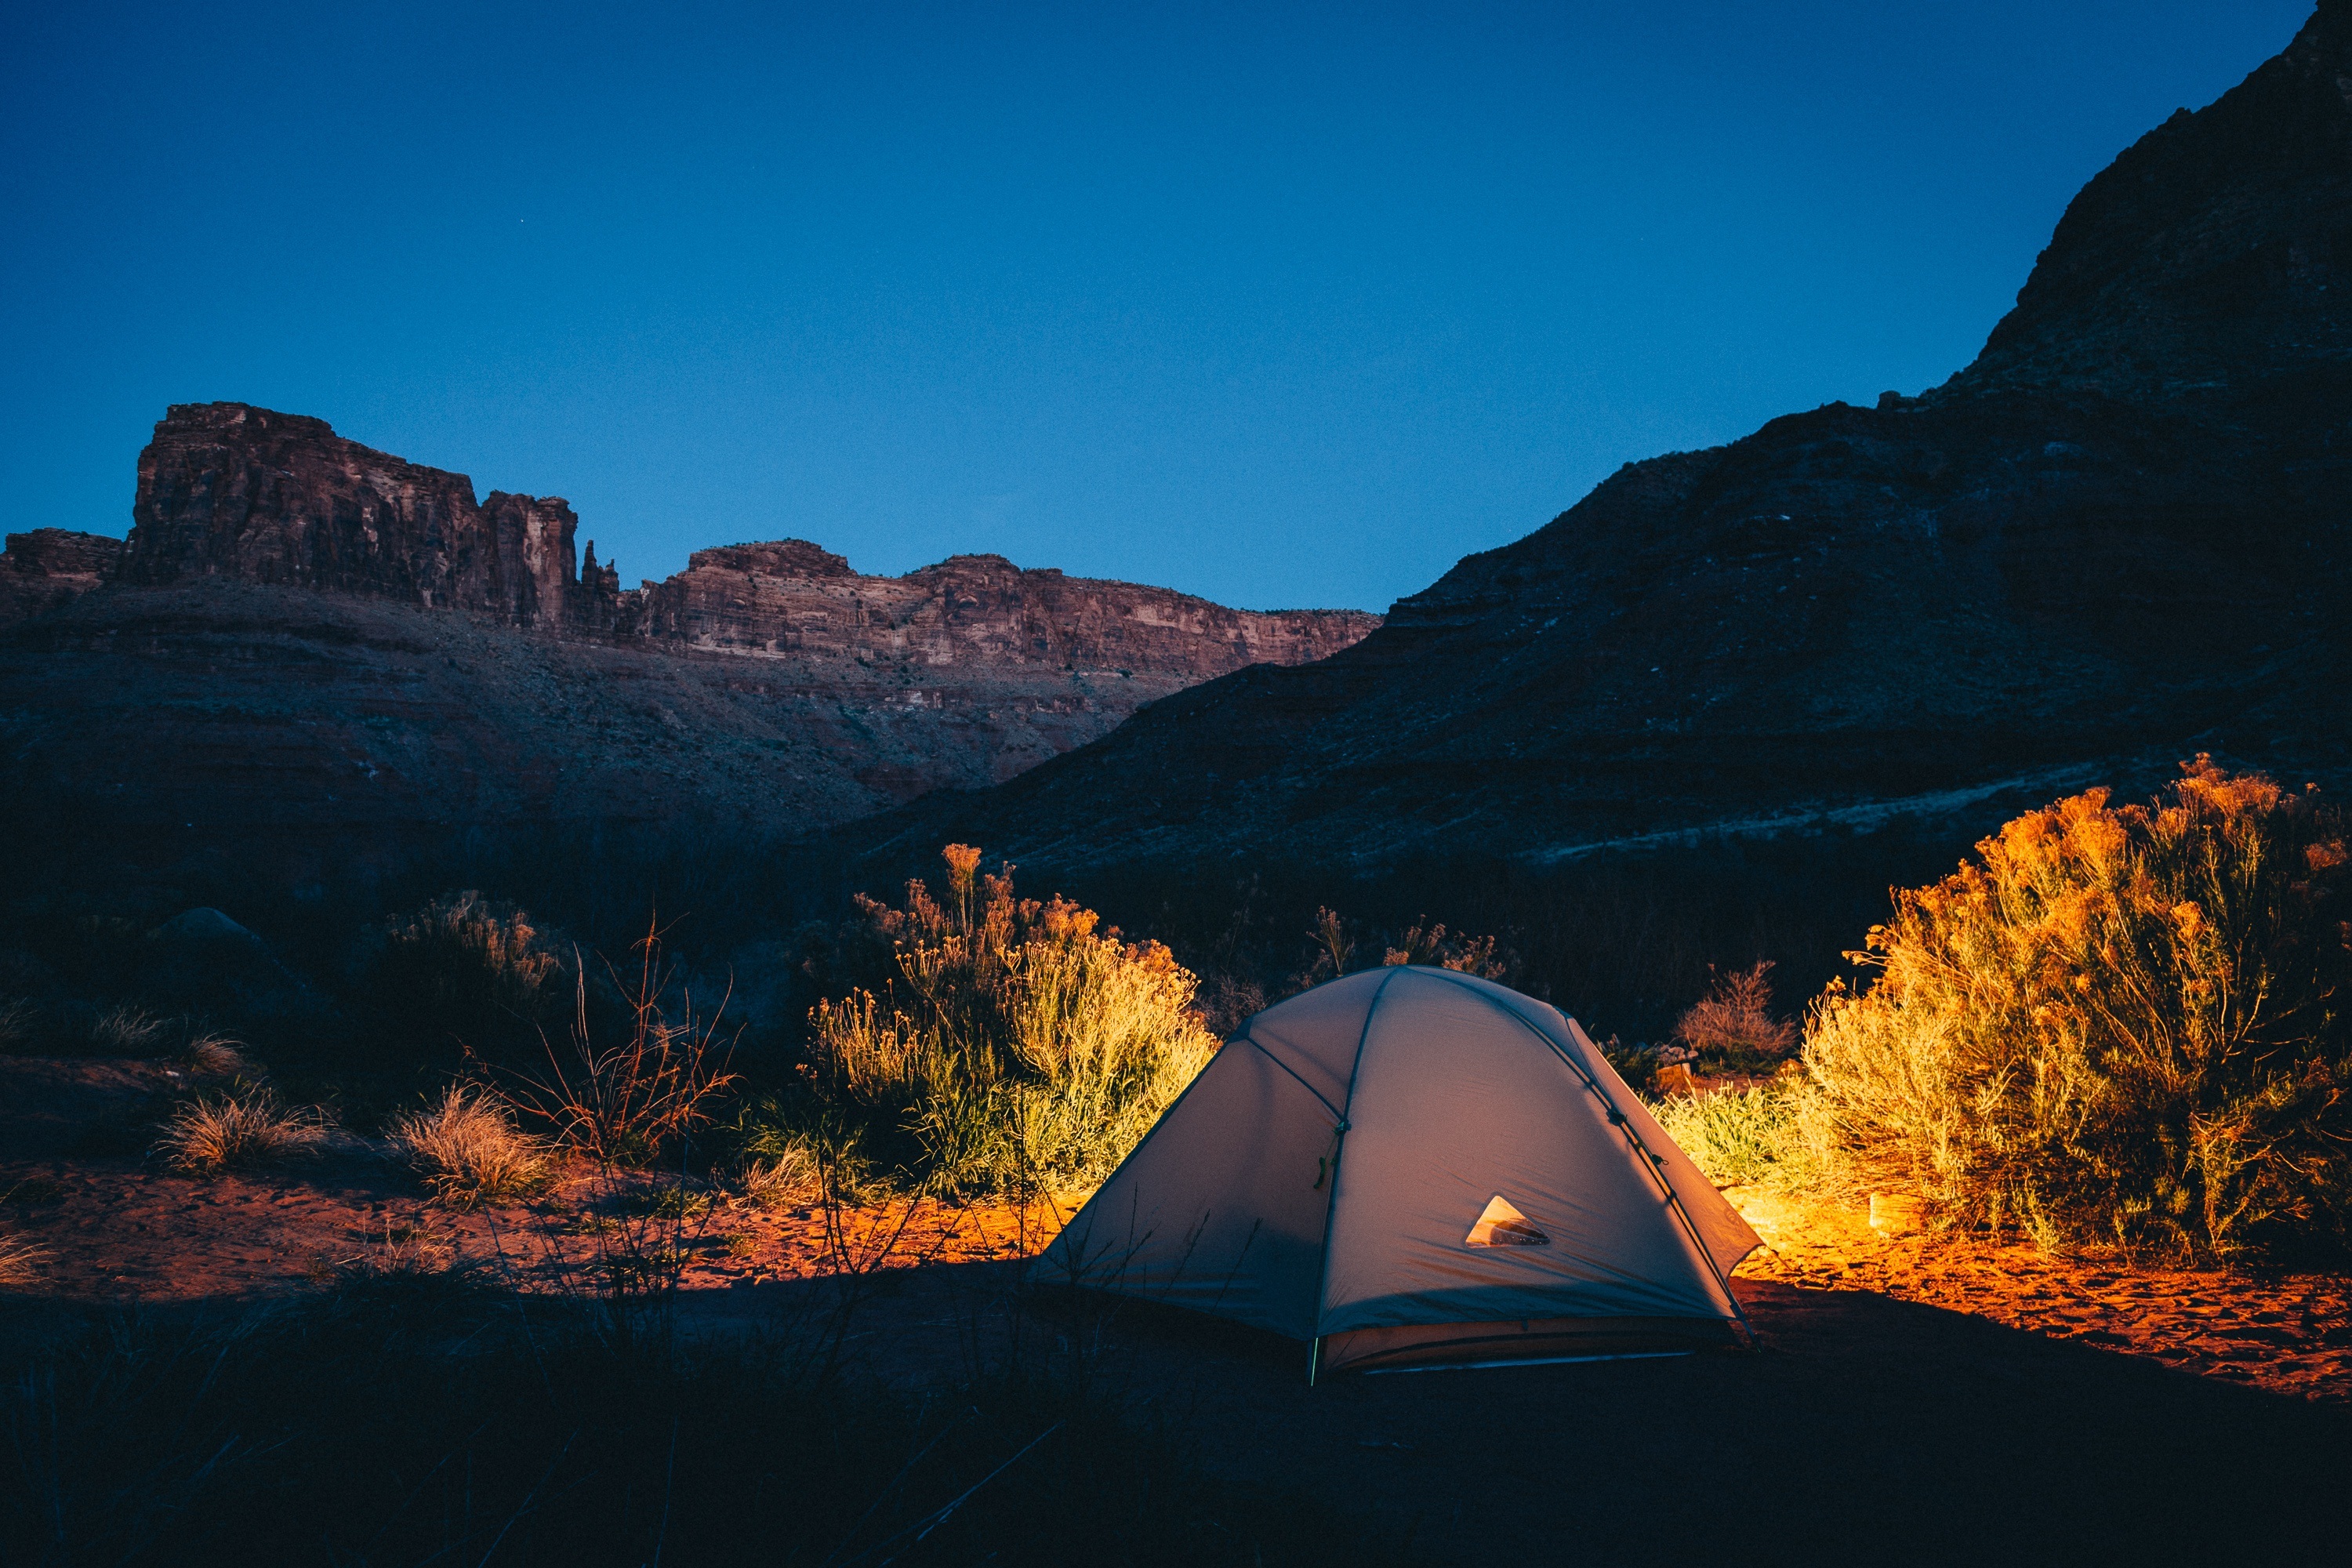 campsite, nature, sunset, mountains, tent, camping